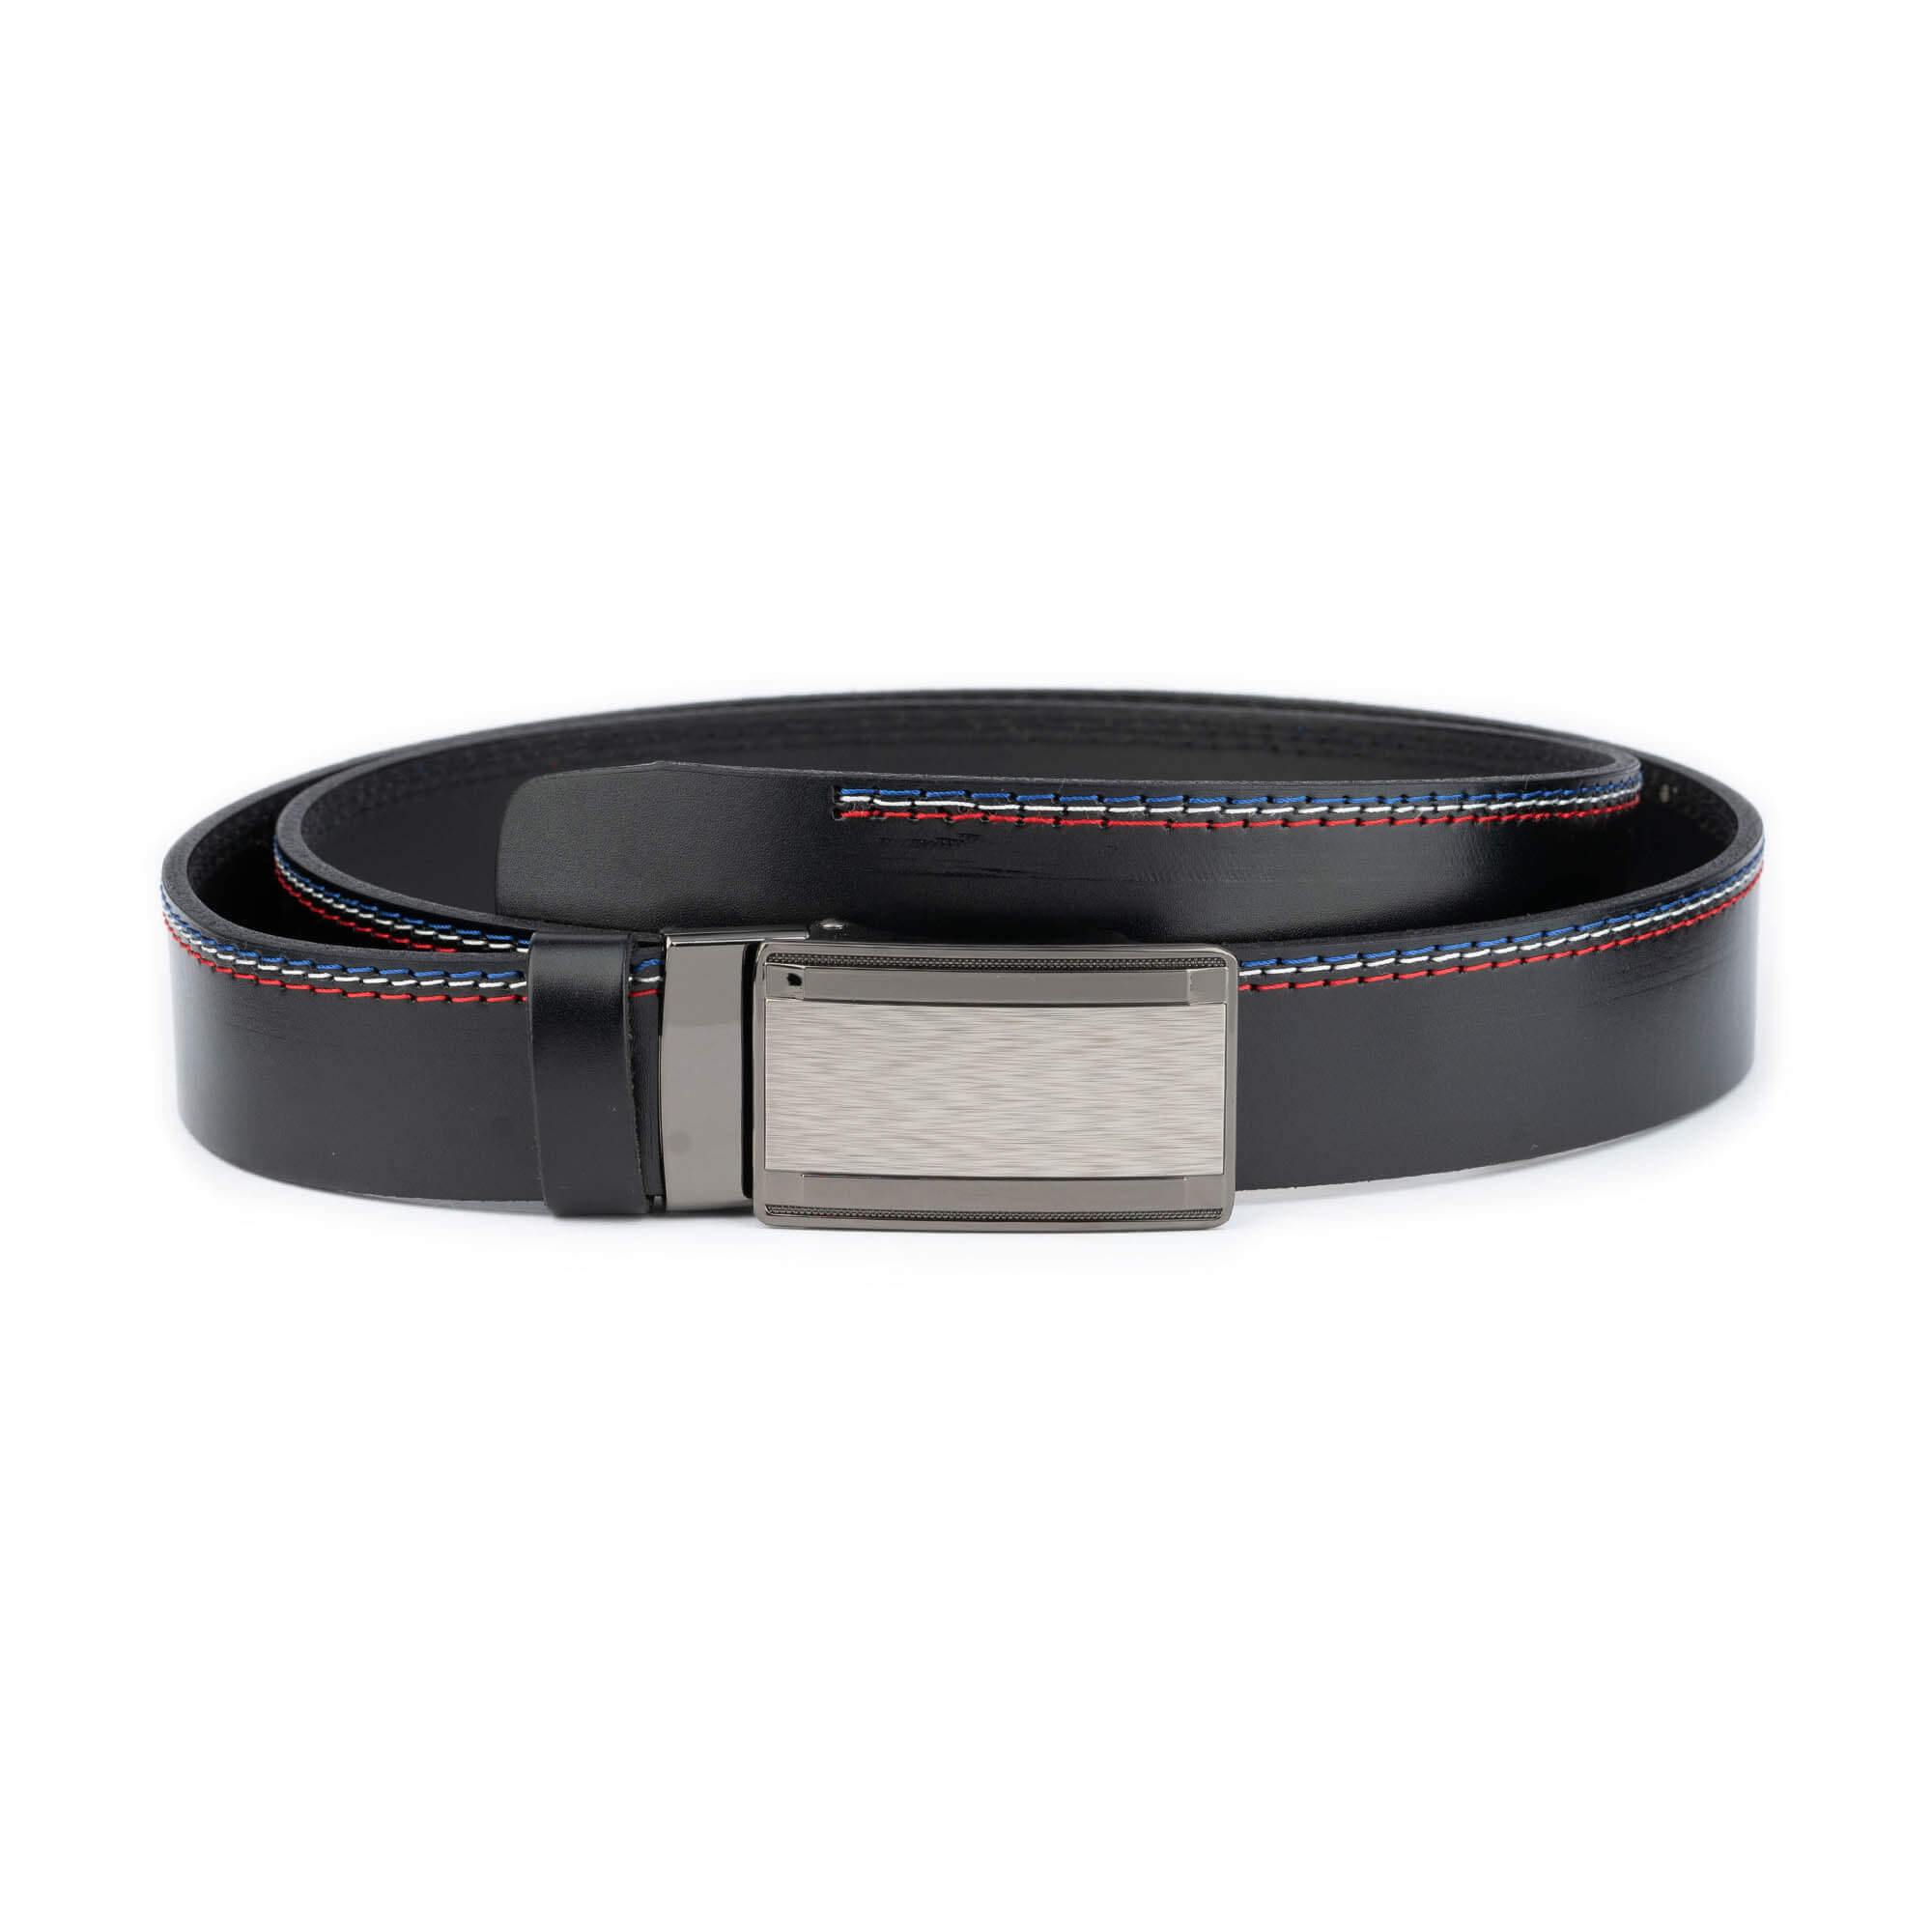 Buy Silent Buckle Black Belt Without Holes - Colorful Stitching ...